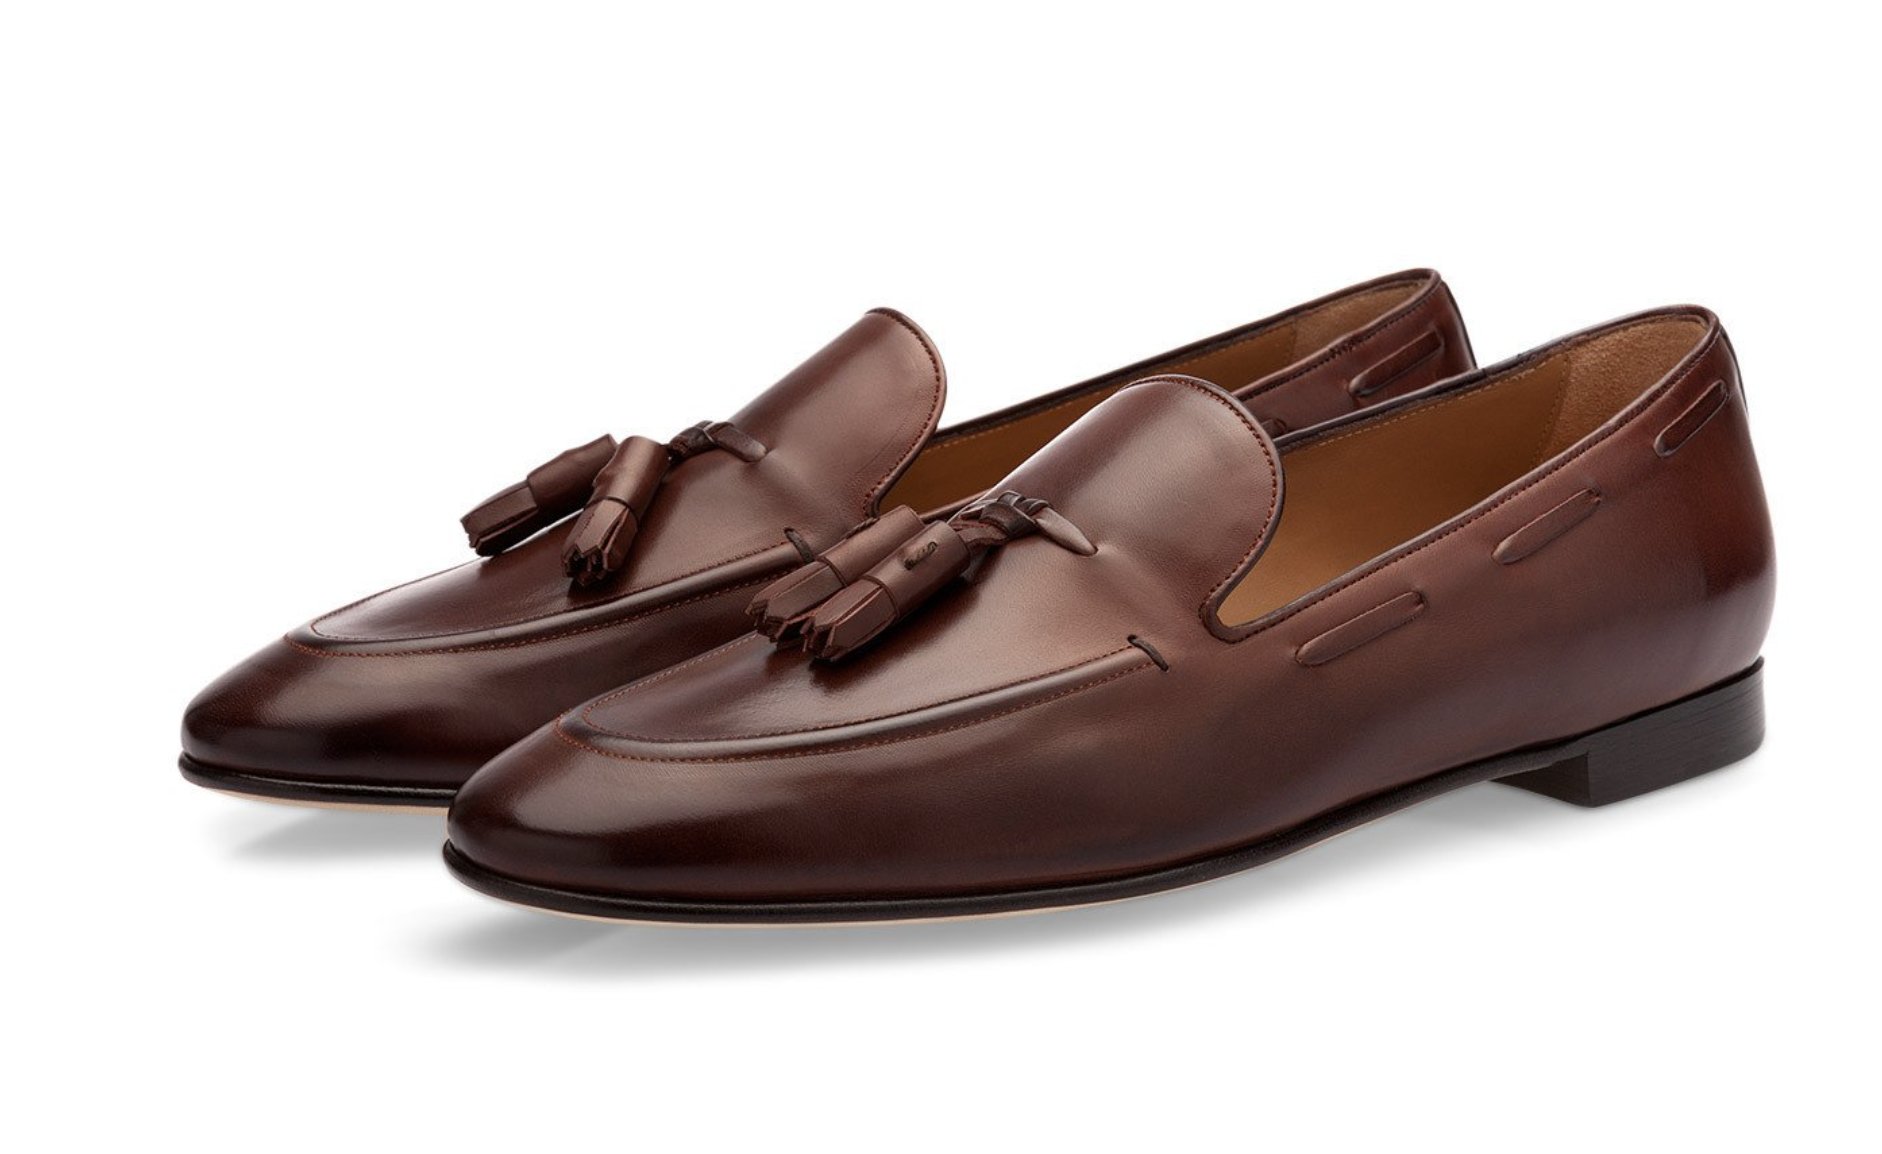 PHILIPPE NAPPA BROWN LOAFERS LEATHER LOAFERS WITH TASSELS - FASHUNE